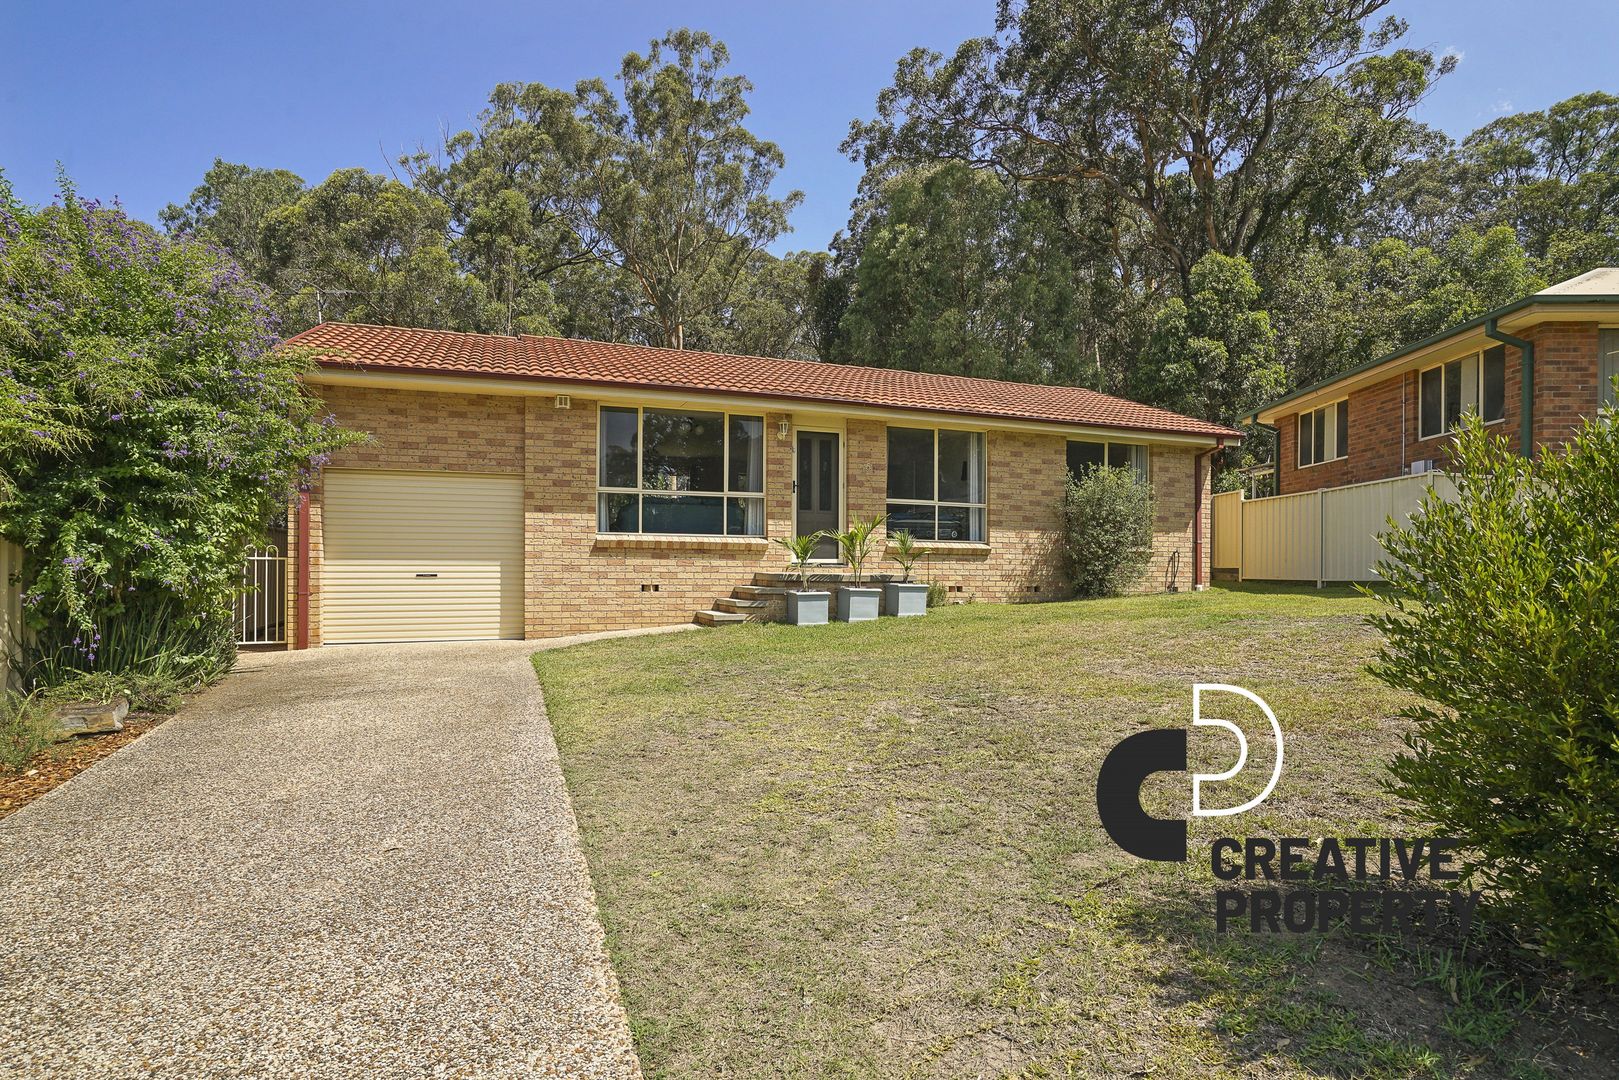 5 Oliver Place, Wallsend NSW 2287